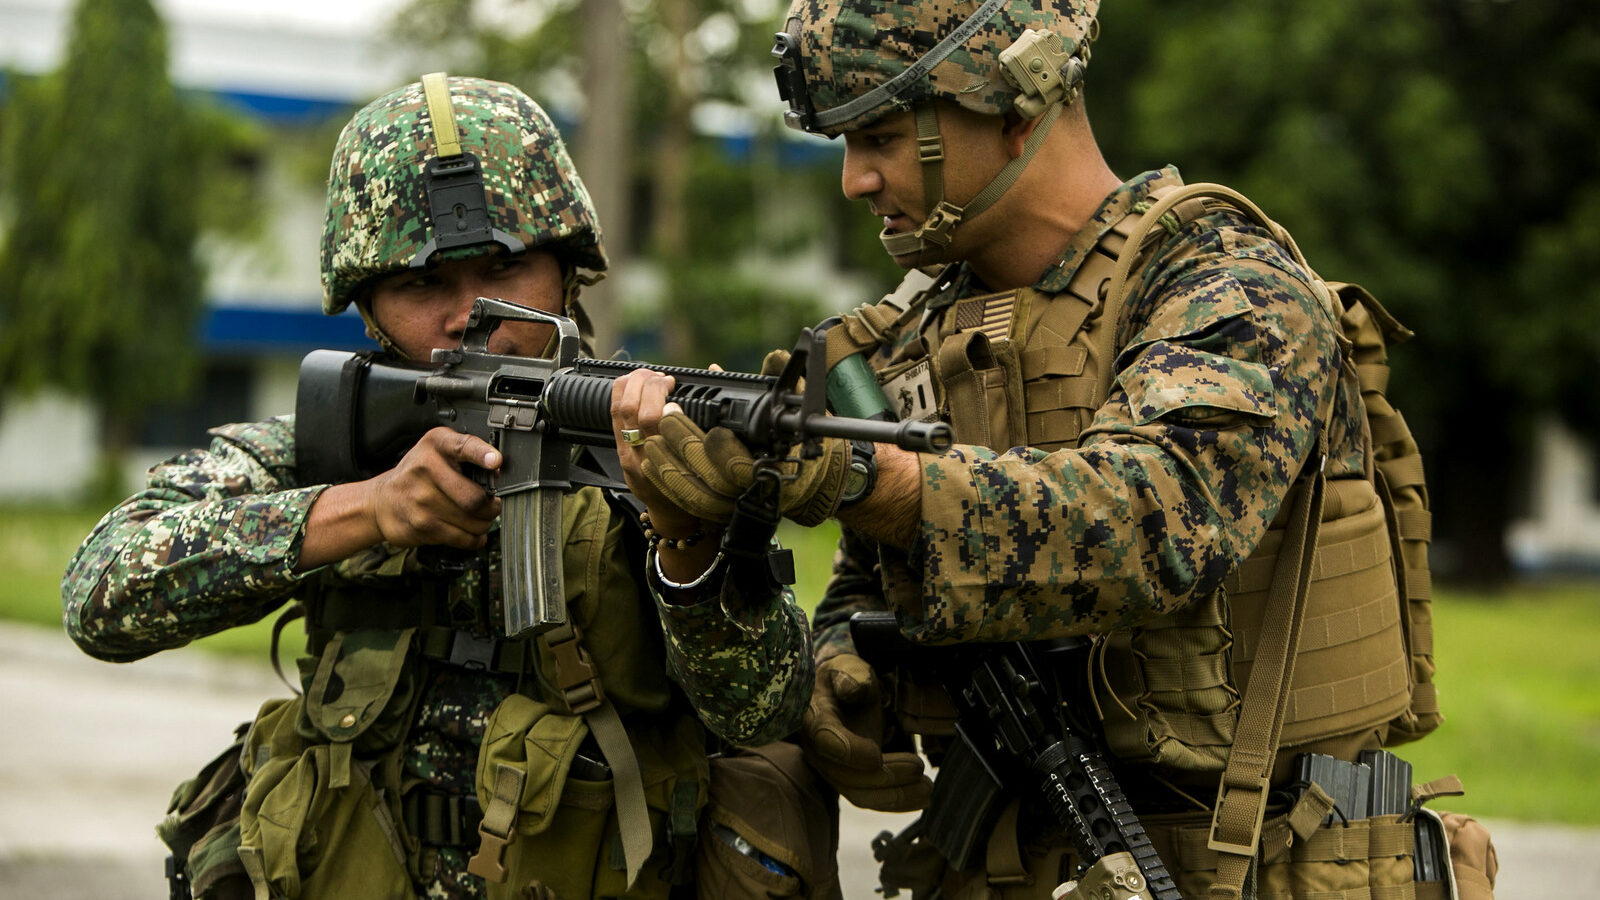 A U.S. Marine teaches a Philippine Marine weapon handling techniques during Air Assault Support Exercise 2015-2 at Basa Air Base in Pampanga, Philippines, July 15, 2015. (Photo: U.S. Marine Corp)